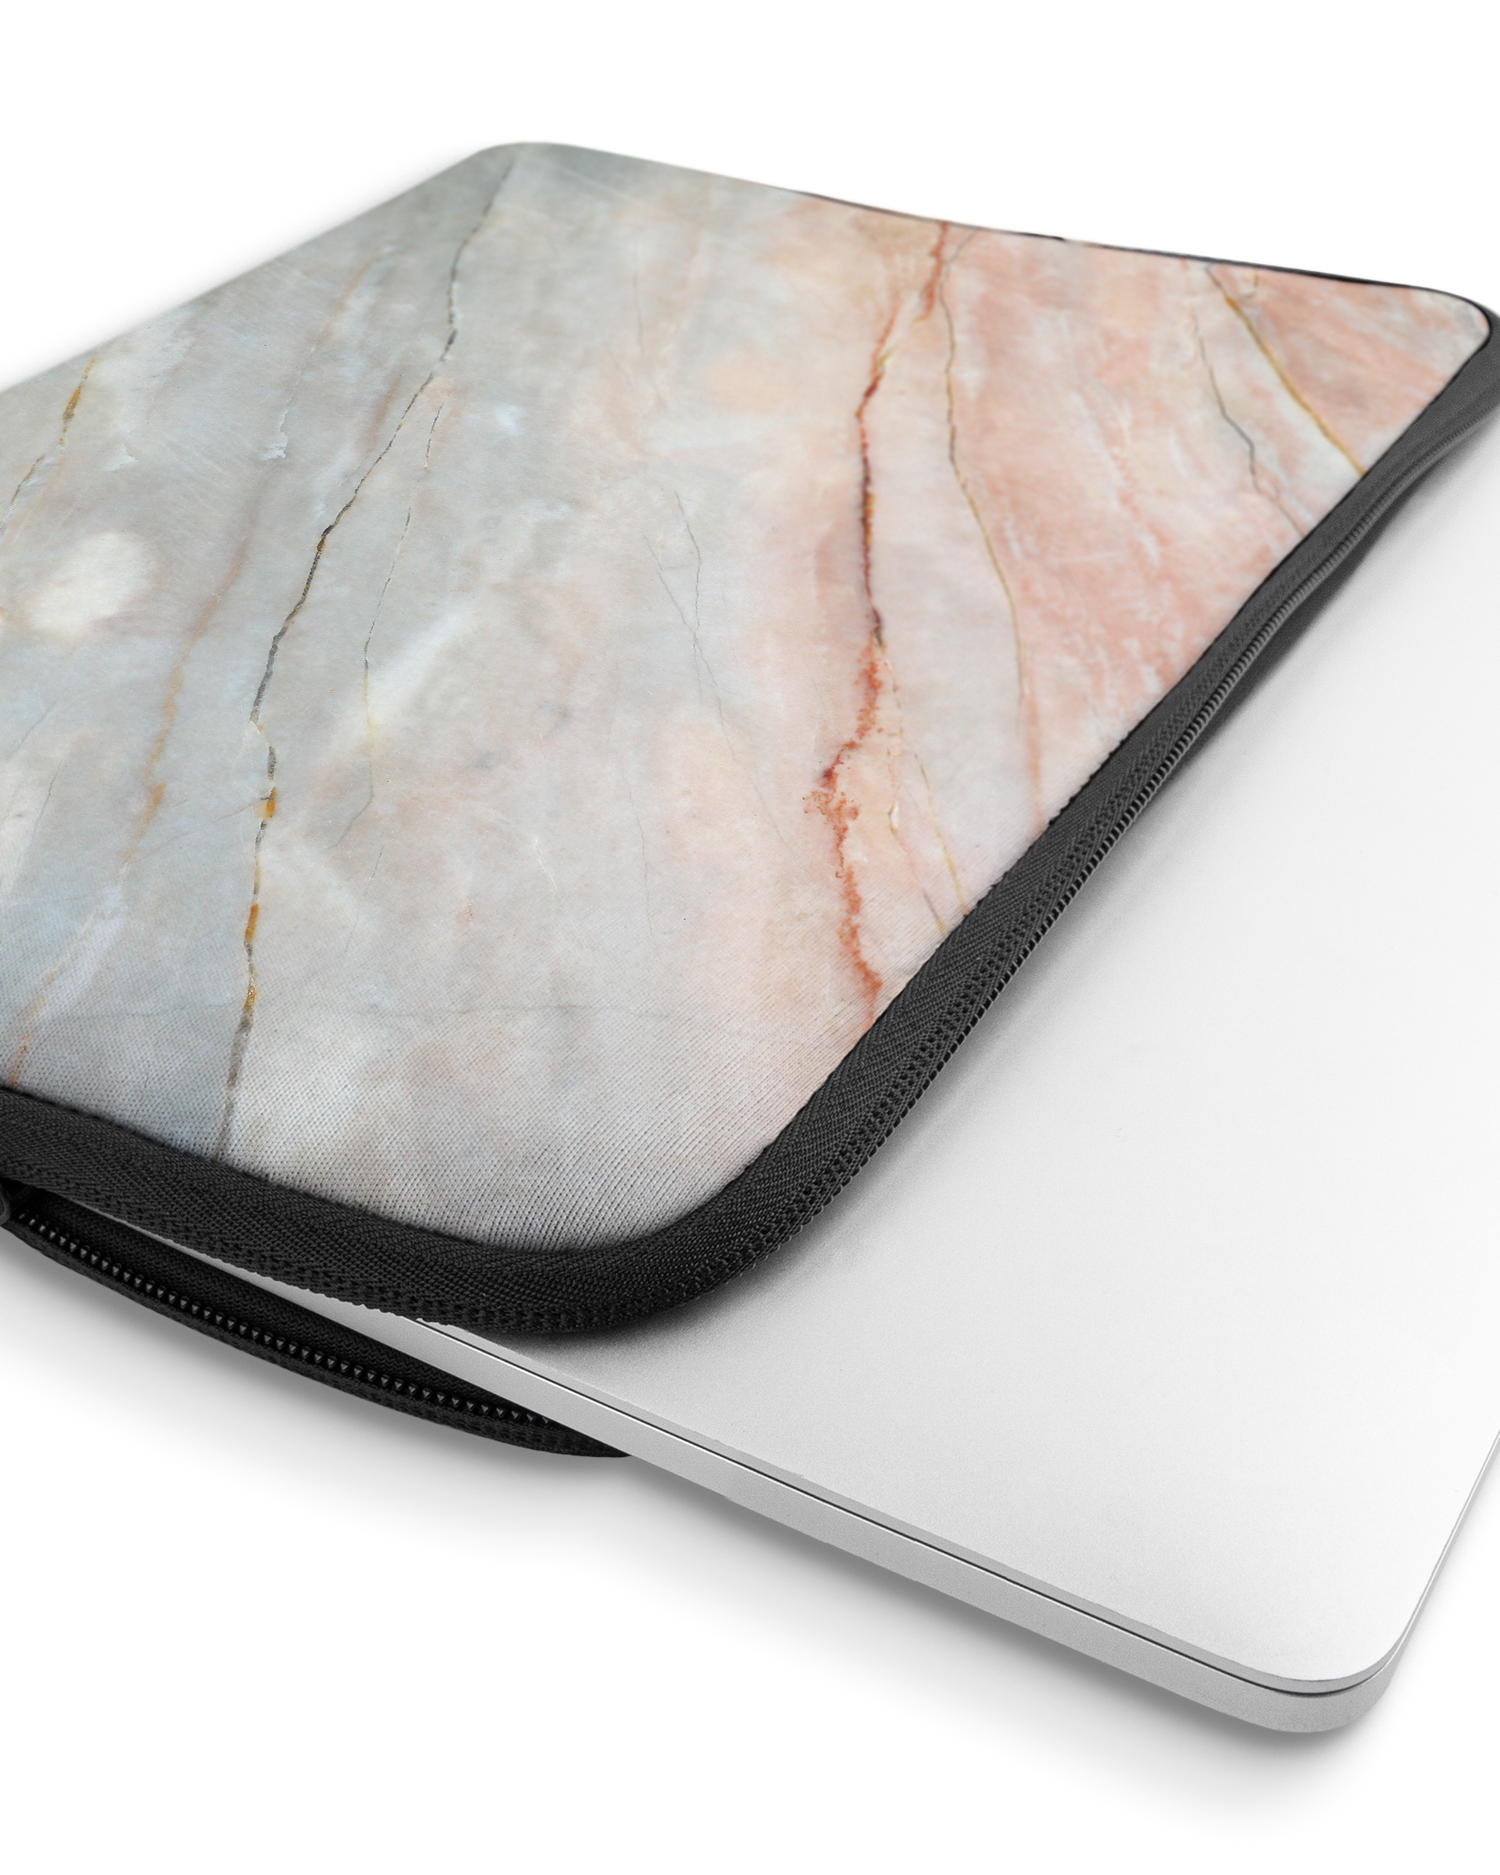 Mother of Pearl Marble Laptop Case 16 inch with device inside